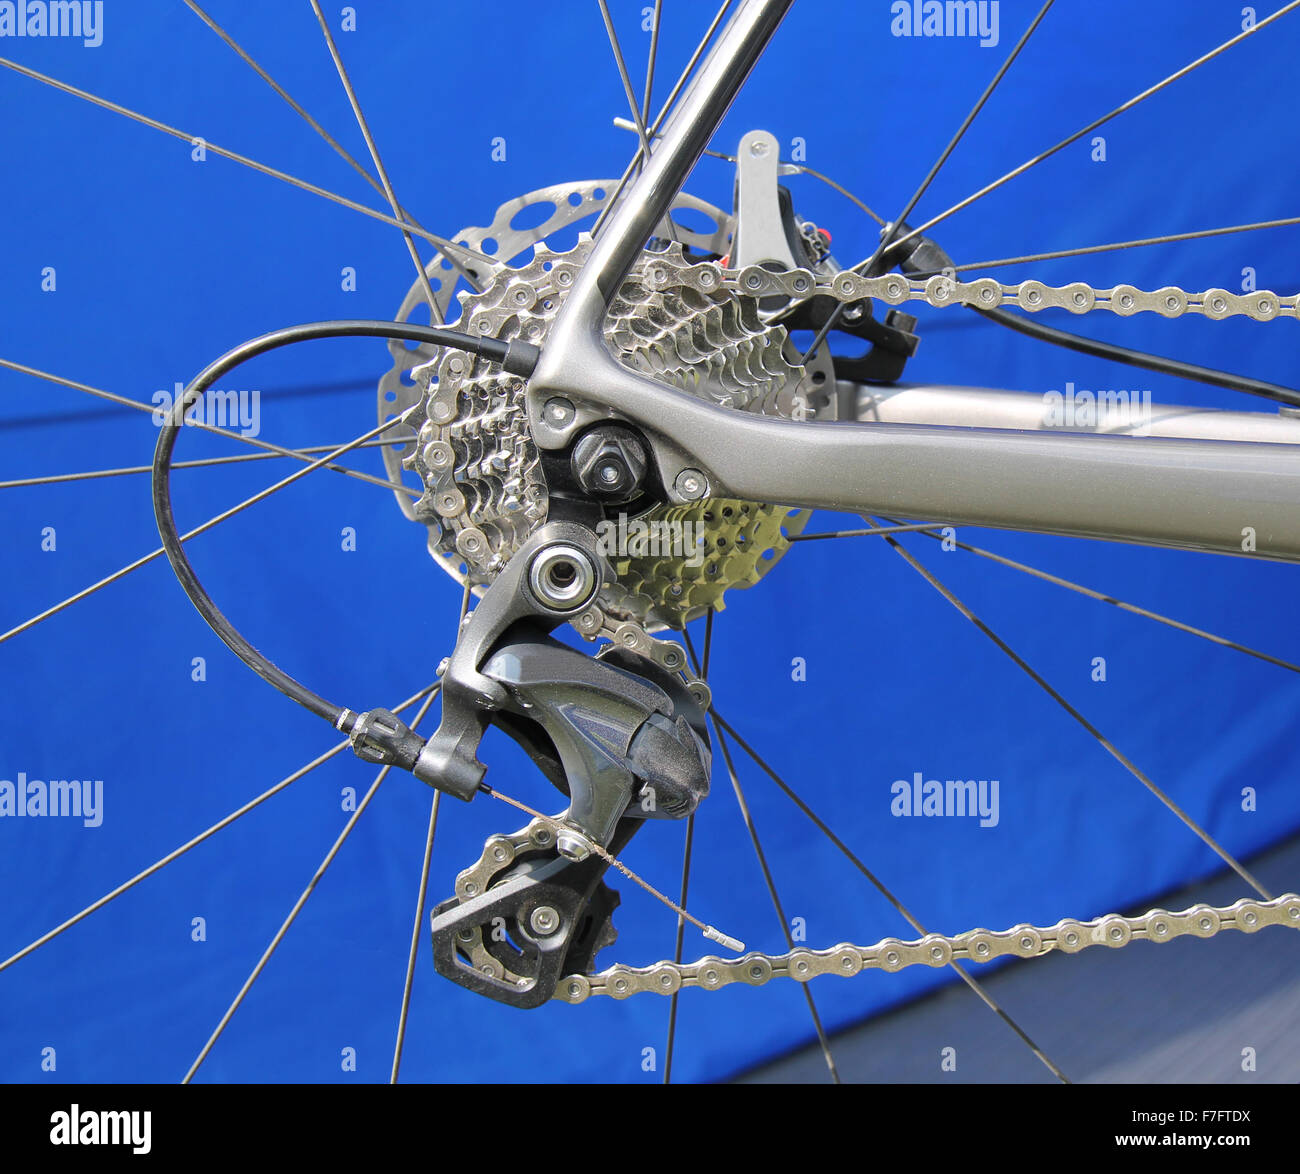 The Gears of a High Performance Racing Bicycle. Stock Photo